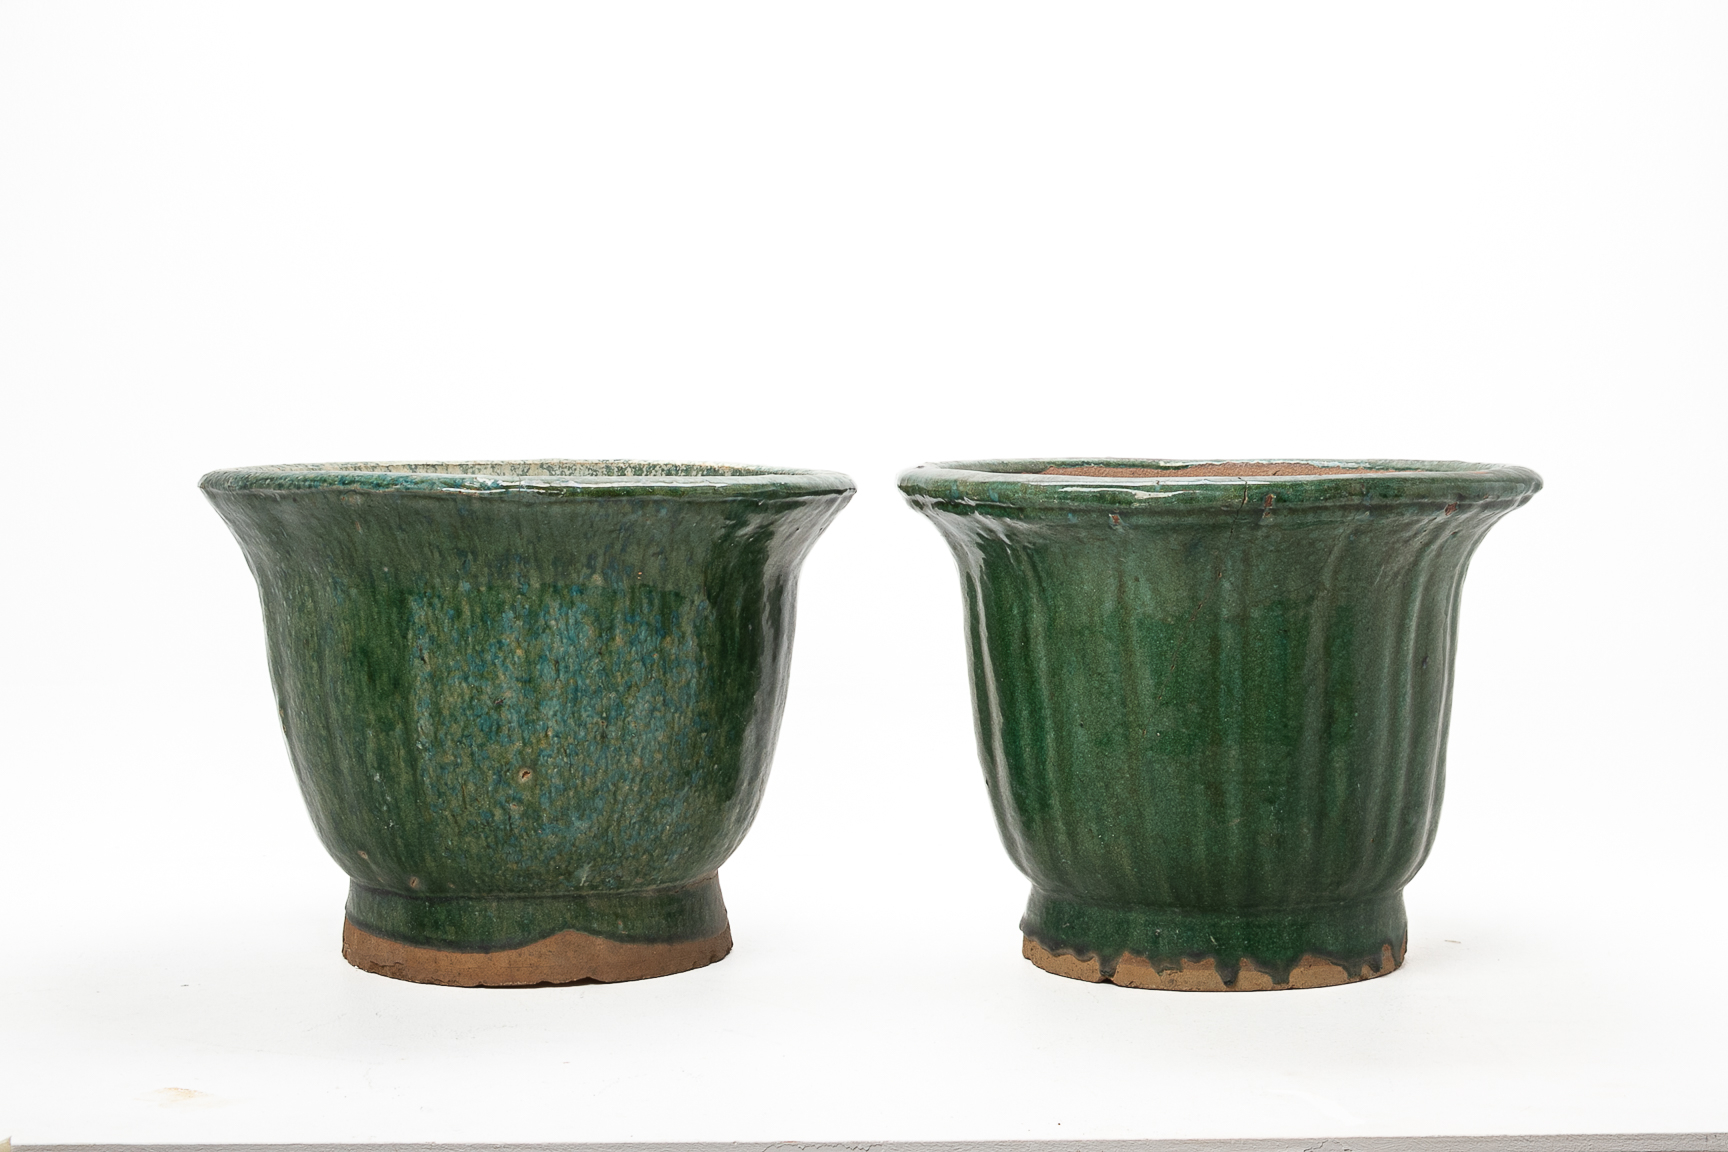 A PAIR OF GREEN GLAZED CERAMIC GARDEN POTS - Image 3 of 5